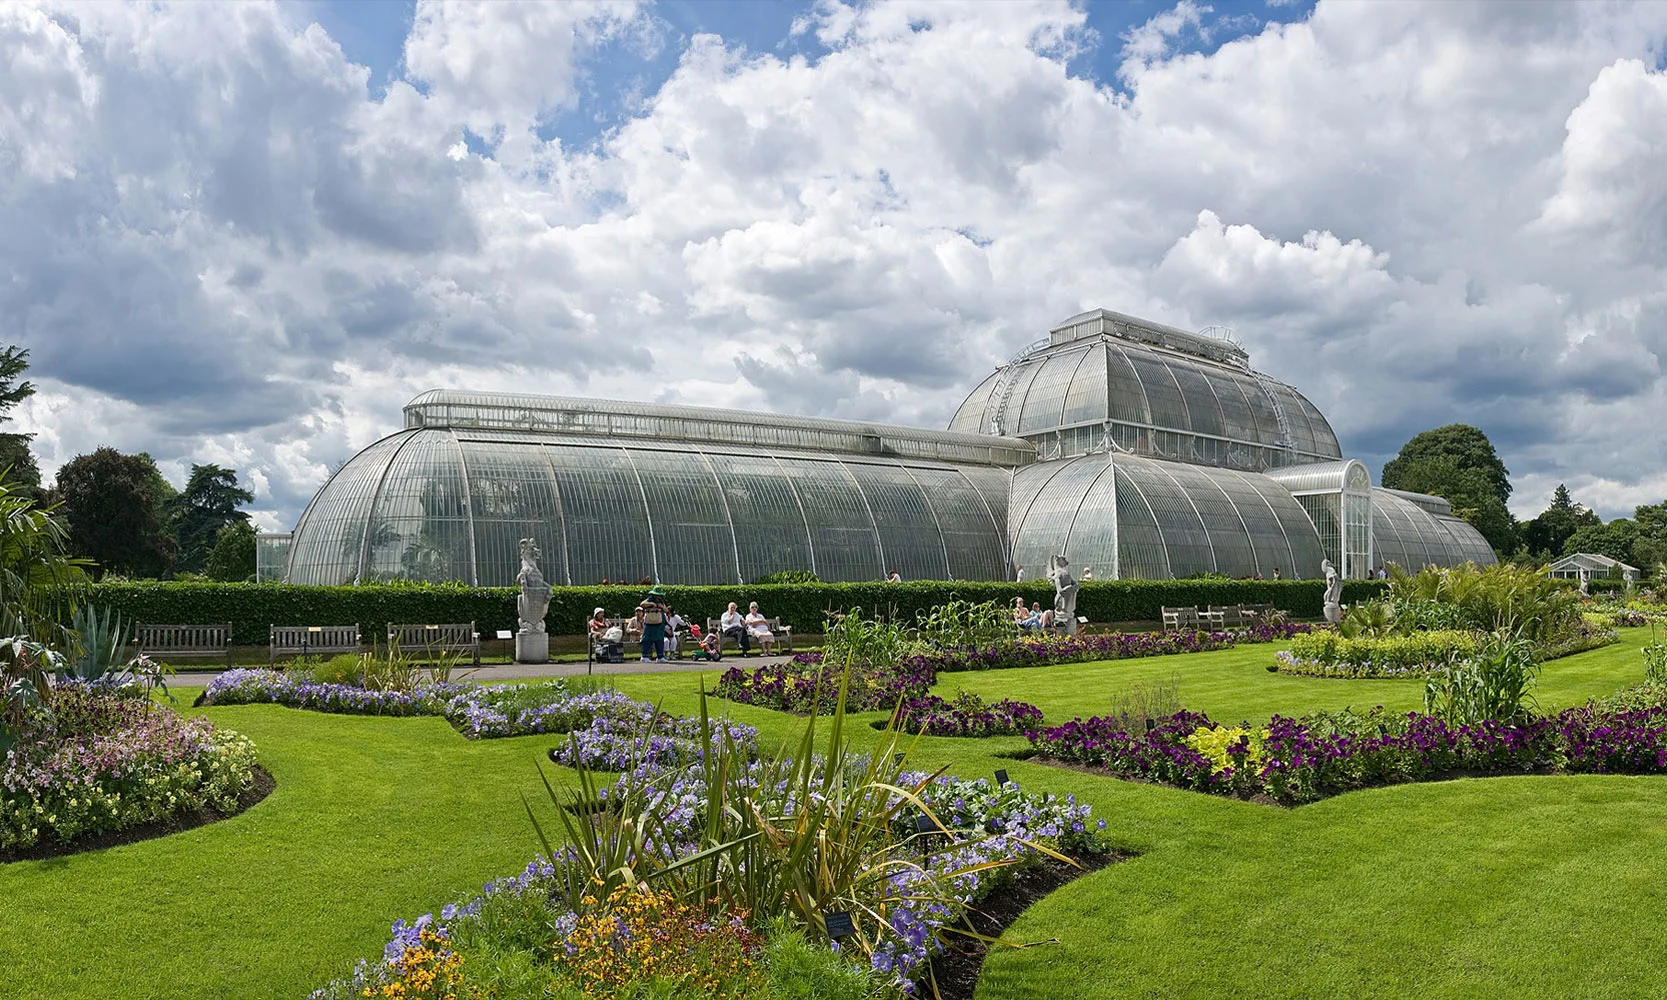 7 Of The Best London Wedding Venues (with reviews) - Kew Gardens